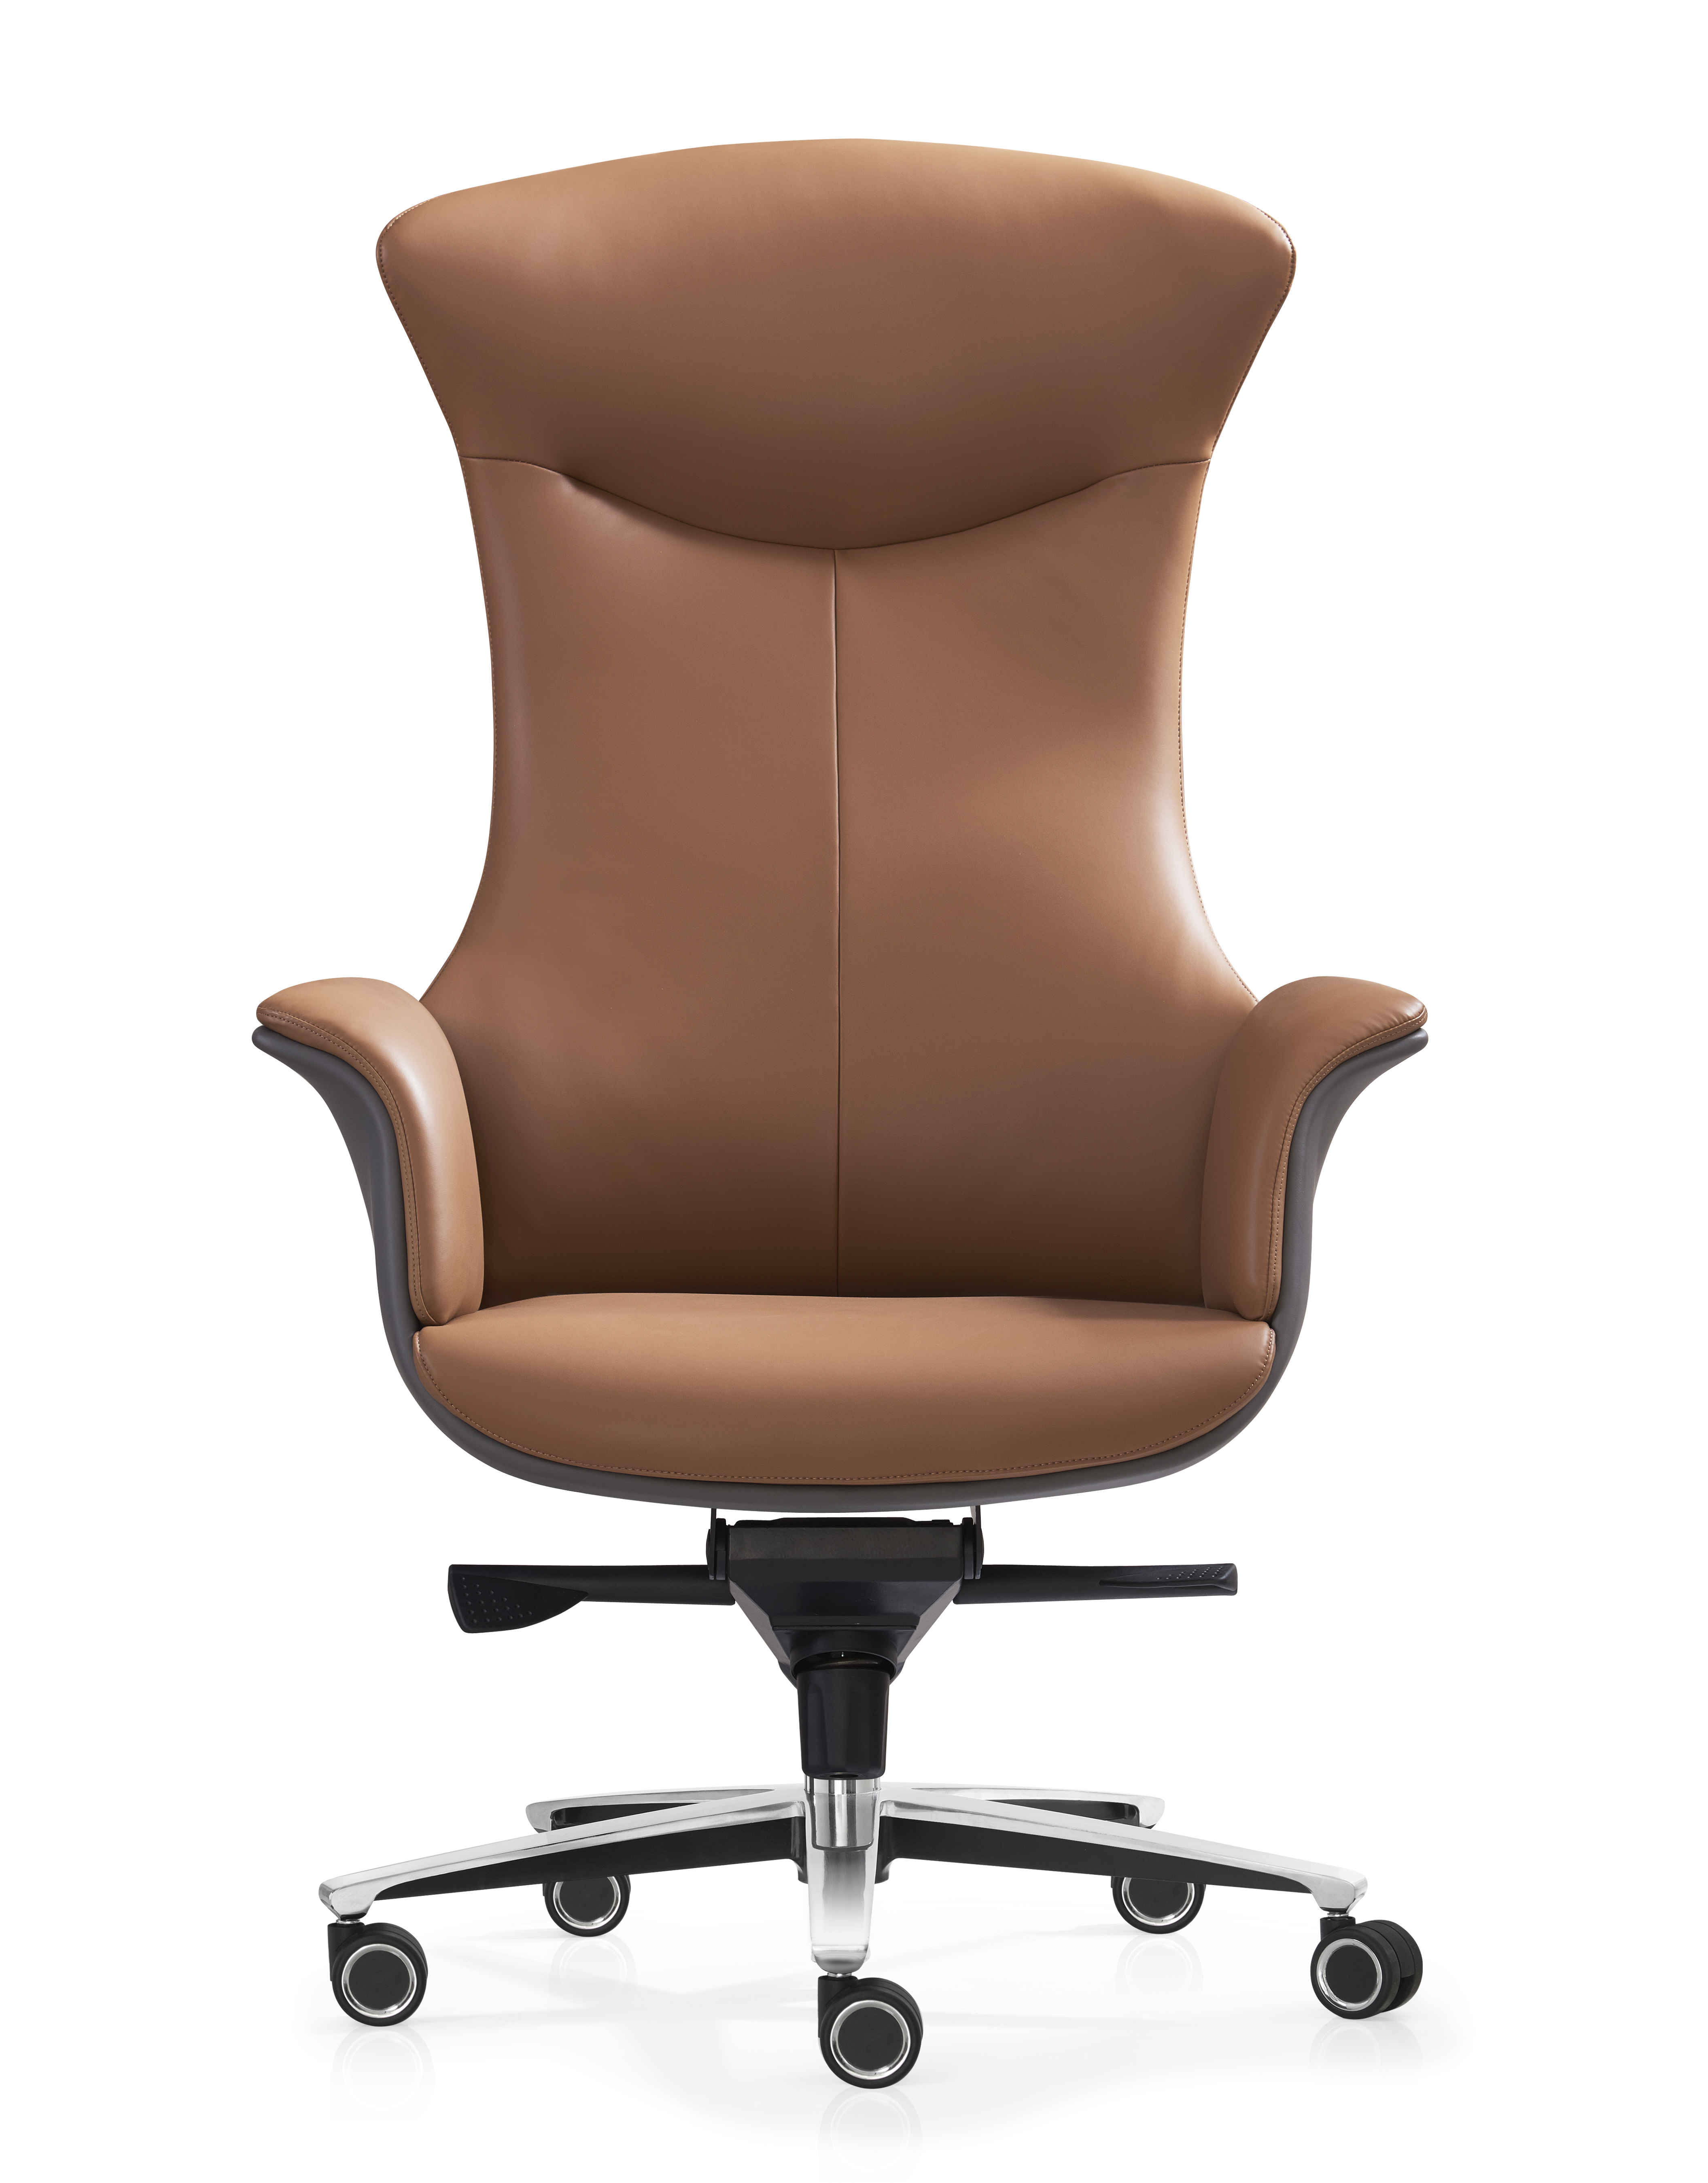 high quality high back office chair, high back leather executive office chair, high back leather executive reclining office chair